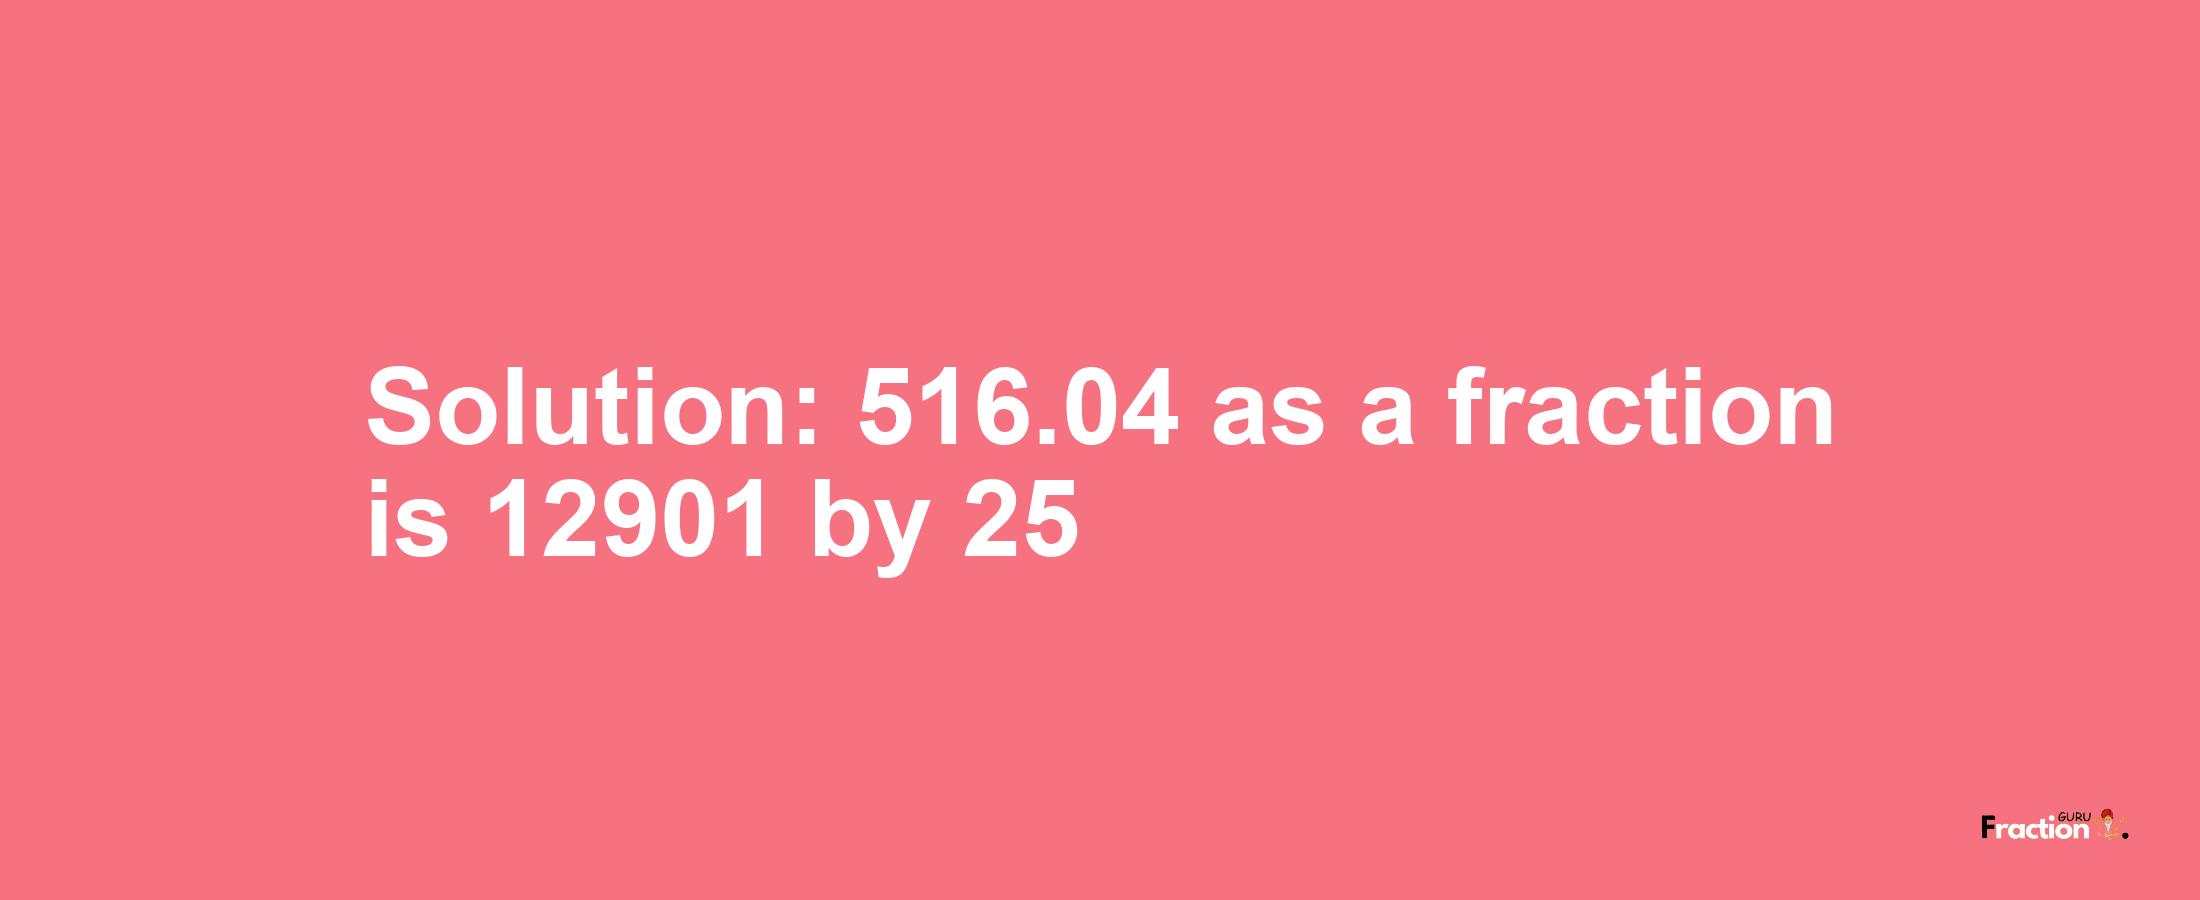 Solution:516.04 as a fraction is 12901/25